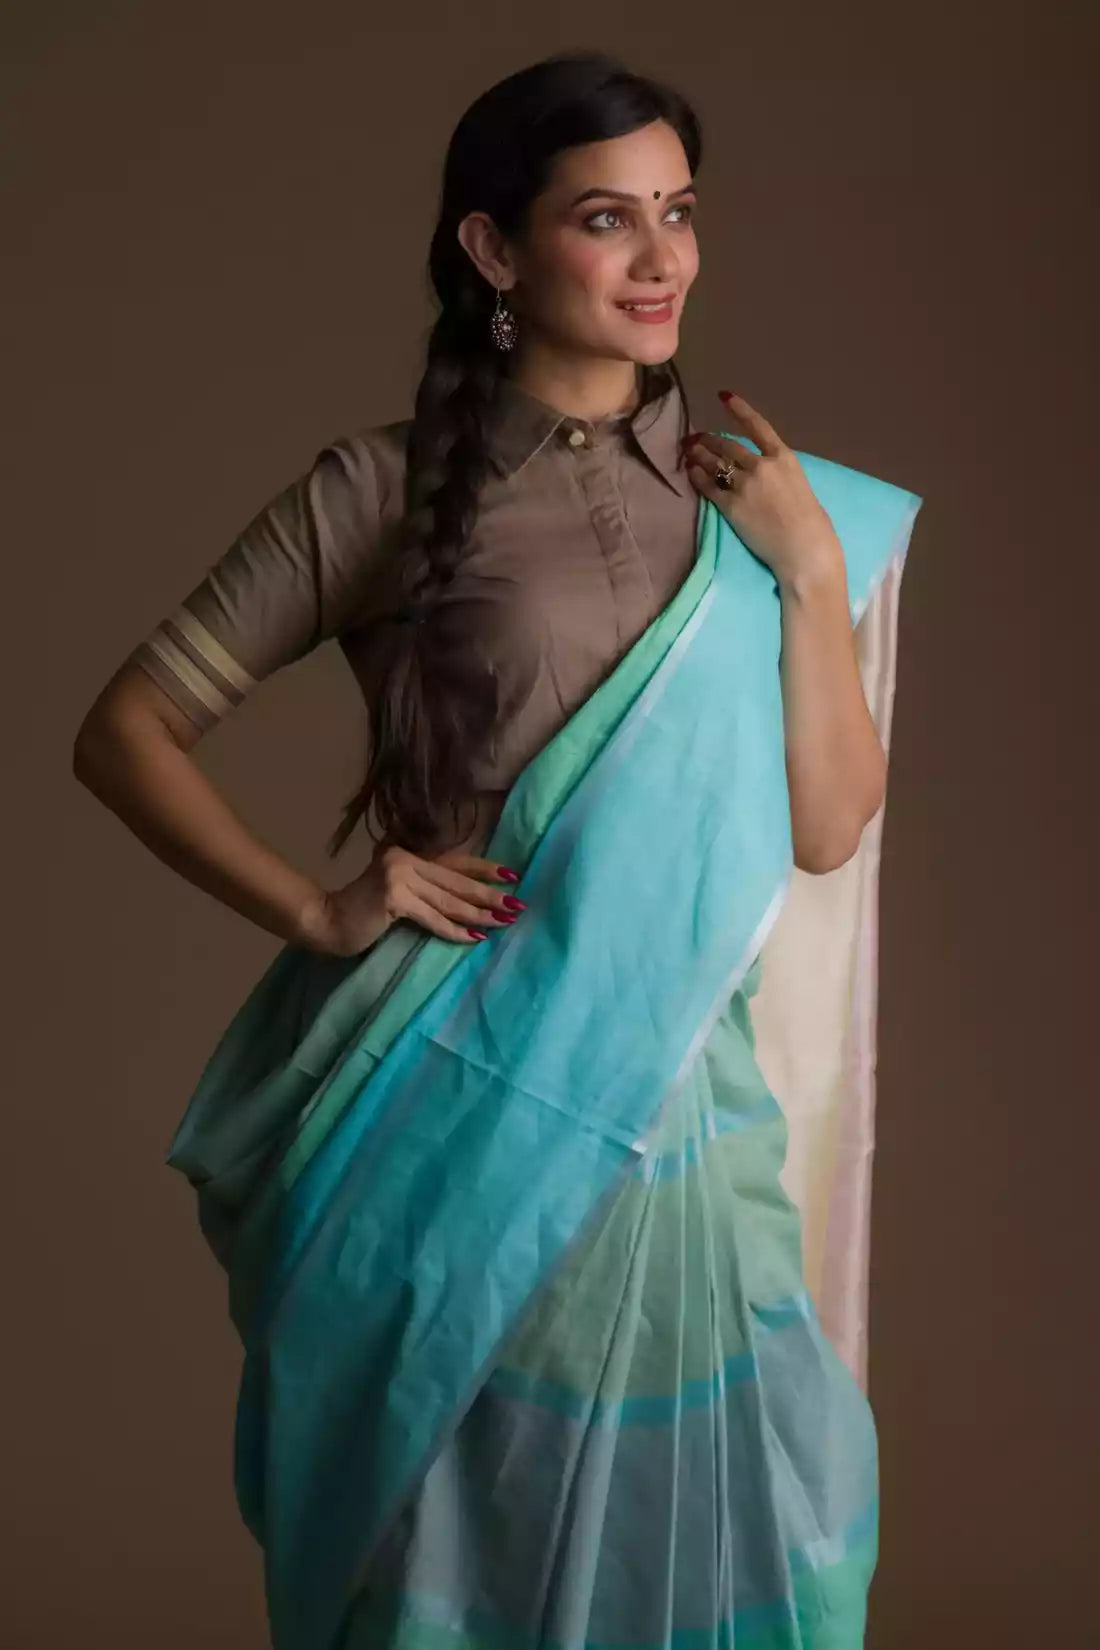 A lady in Pure Cotton Horizontal stripes Casual Saree, womens workwear standing against a beige background looking sideways